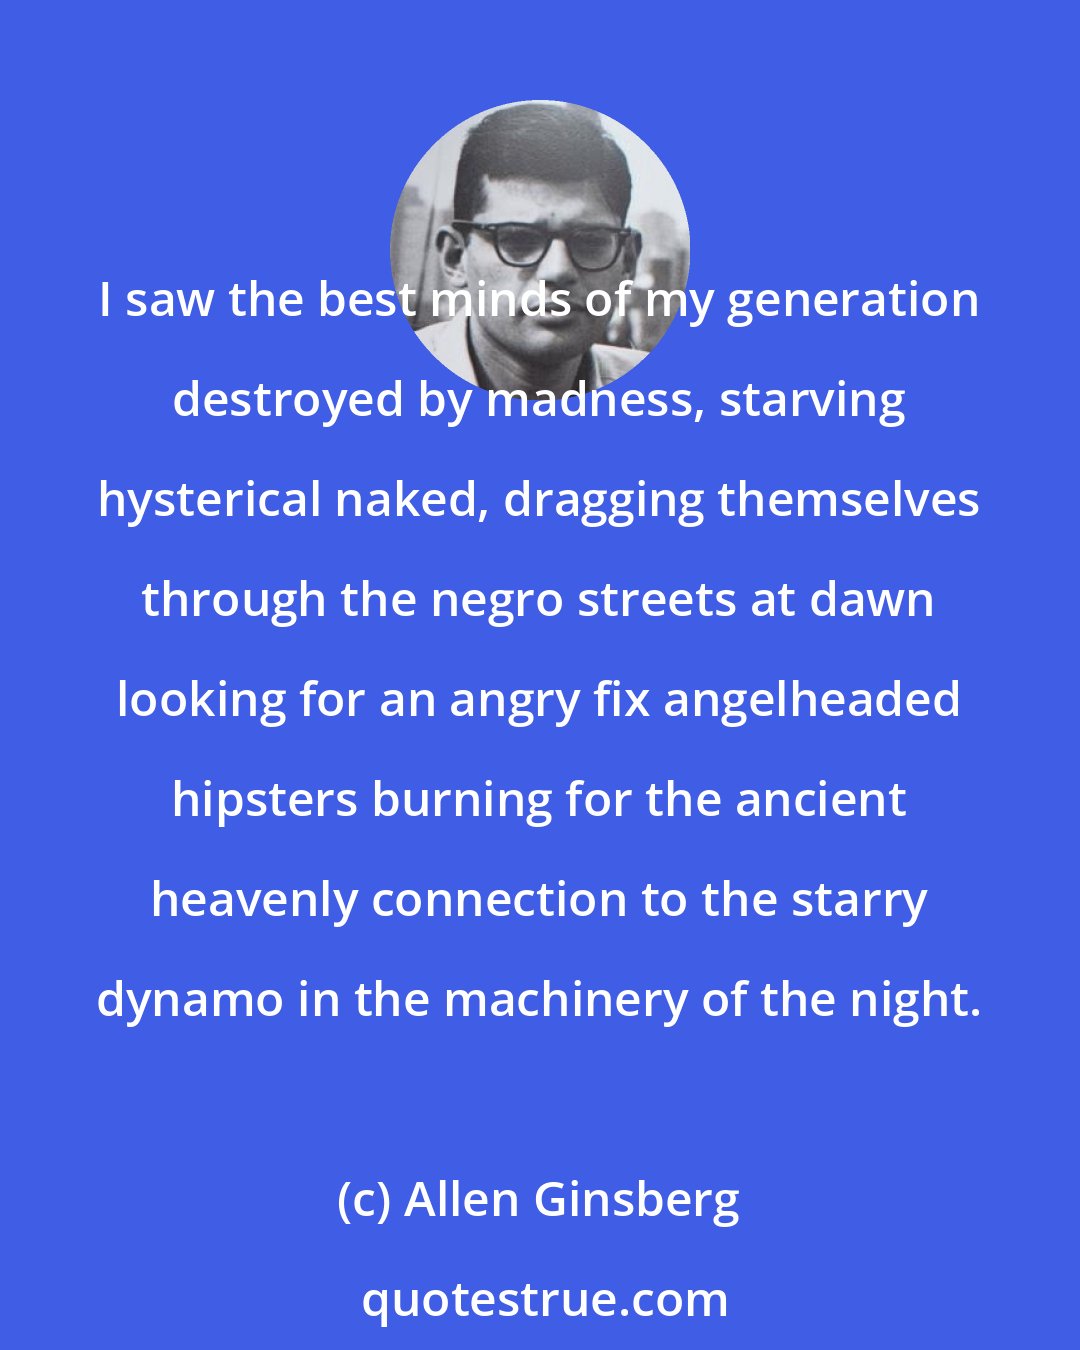 Allen Ginsberg: I saw the best minds of my generation destroyed by madness, starving hysterical naked, dragging themselves through the negro streets at dawn looking for an angry fix angelheaded hipsters burning for the ancient heavenly connection to the starry dynamo in the machinery of the night.